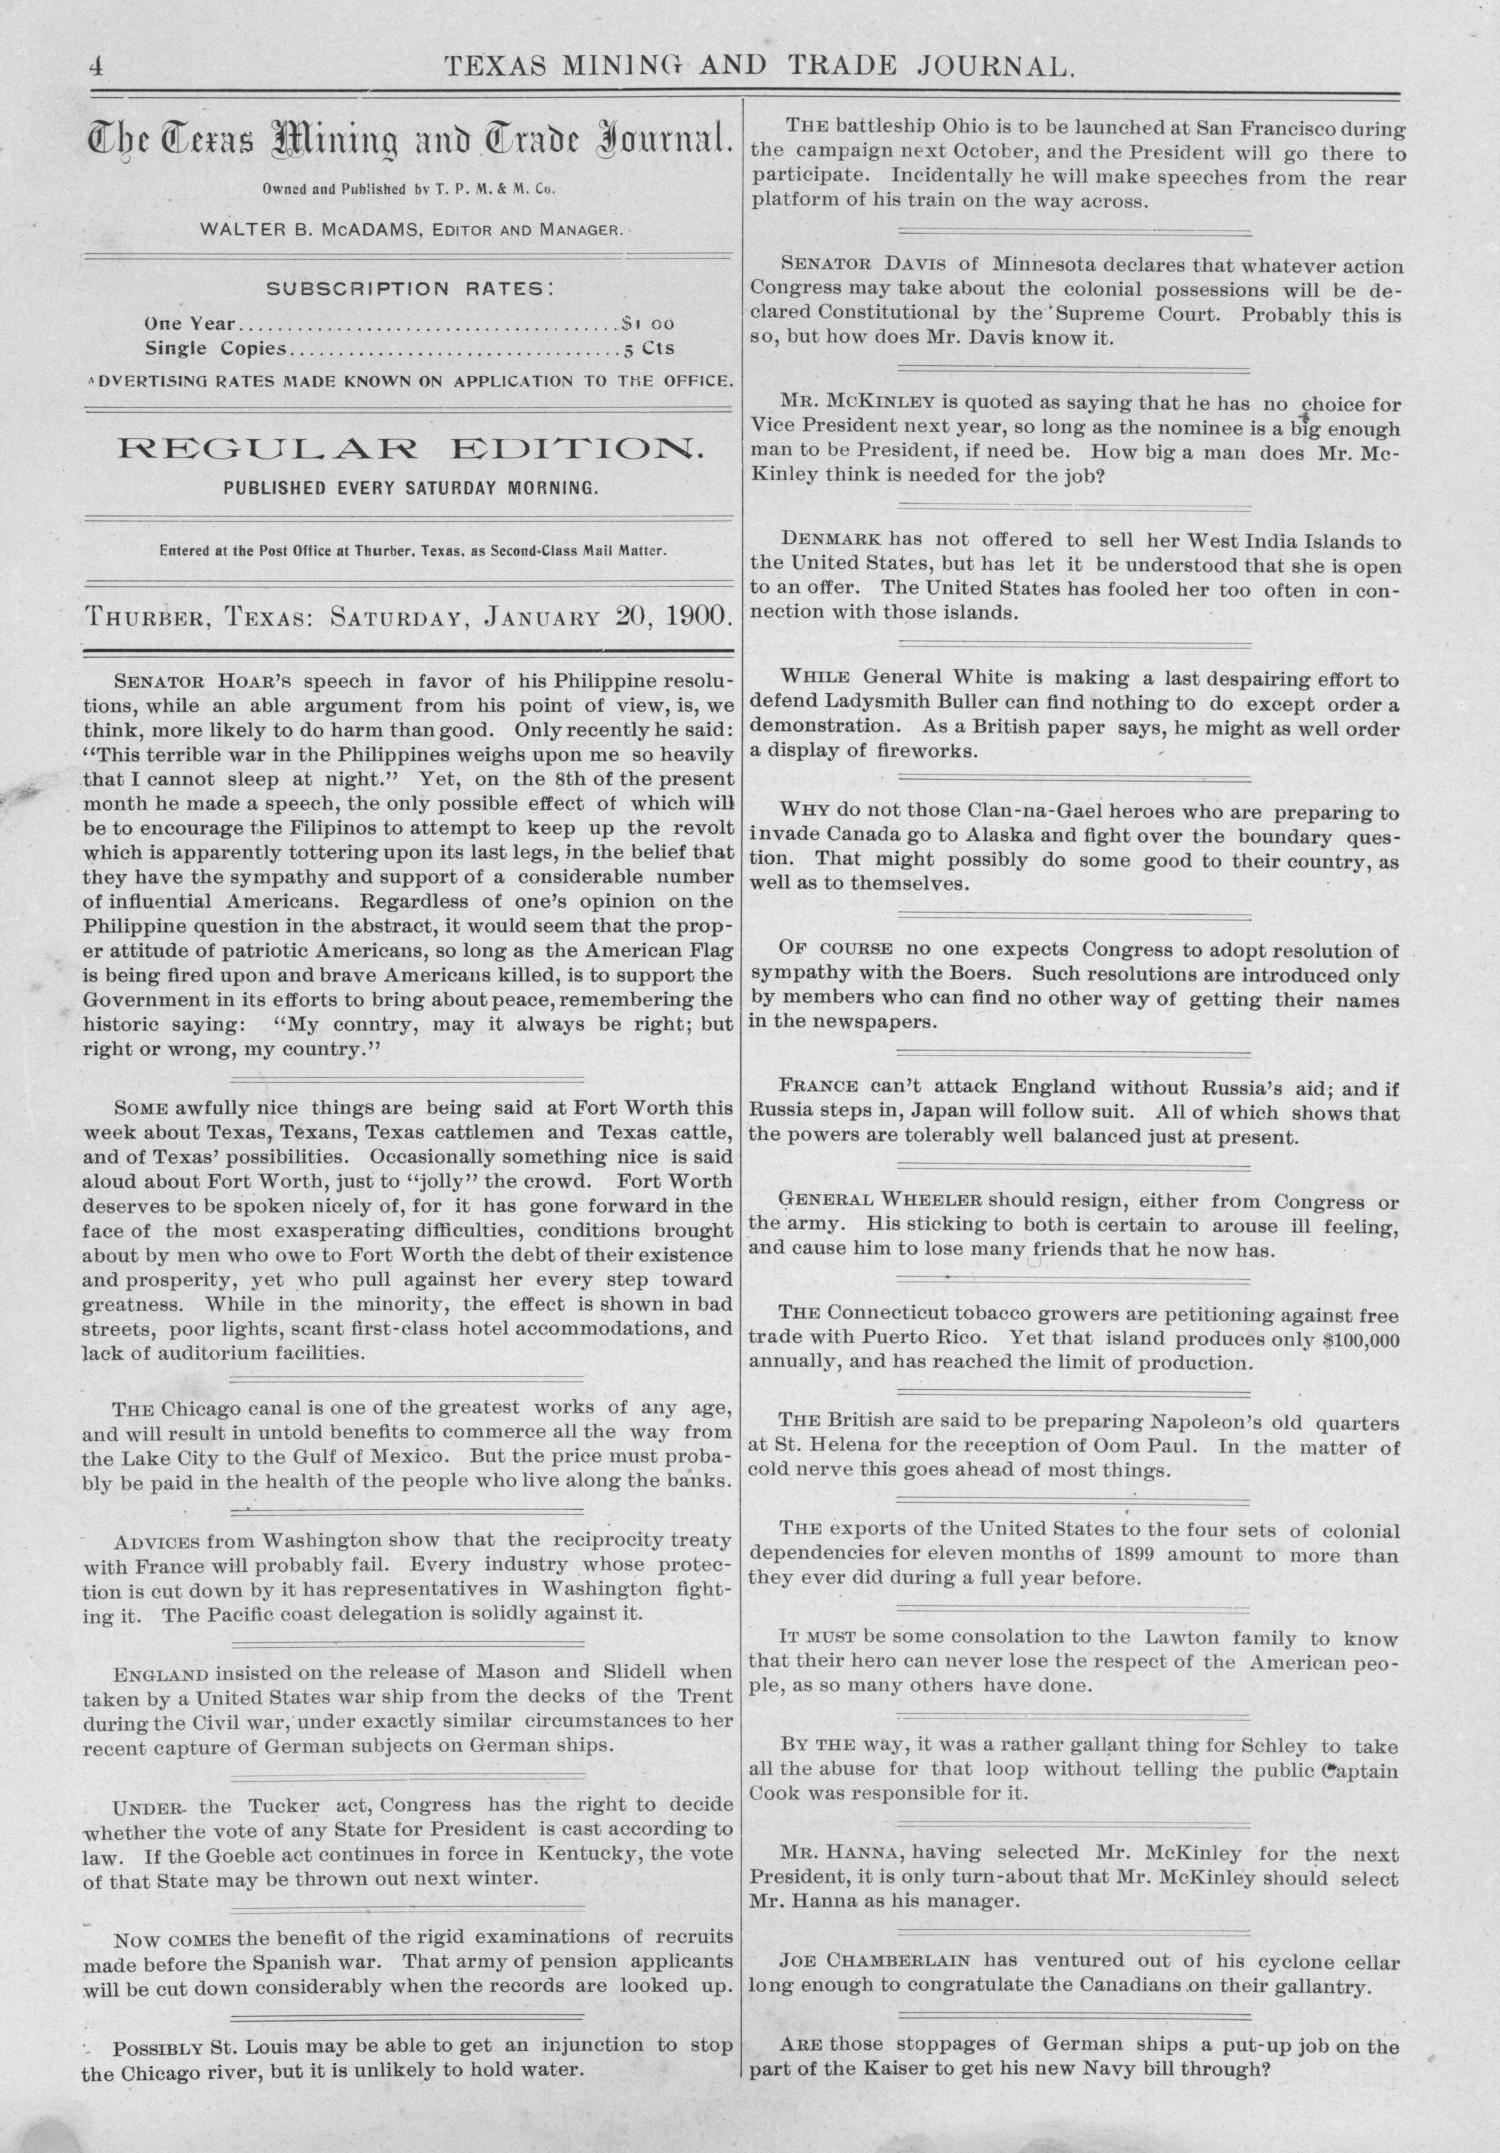 Texas Mining and Trade Journal, Volume 4, Number 27, Saturday, January 20, 1900
                                                
                                                    4
                                                